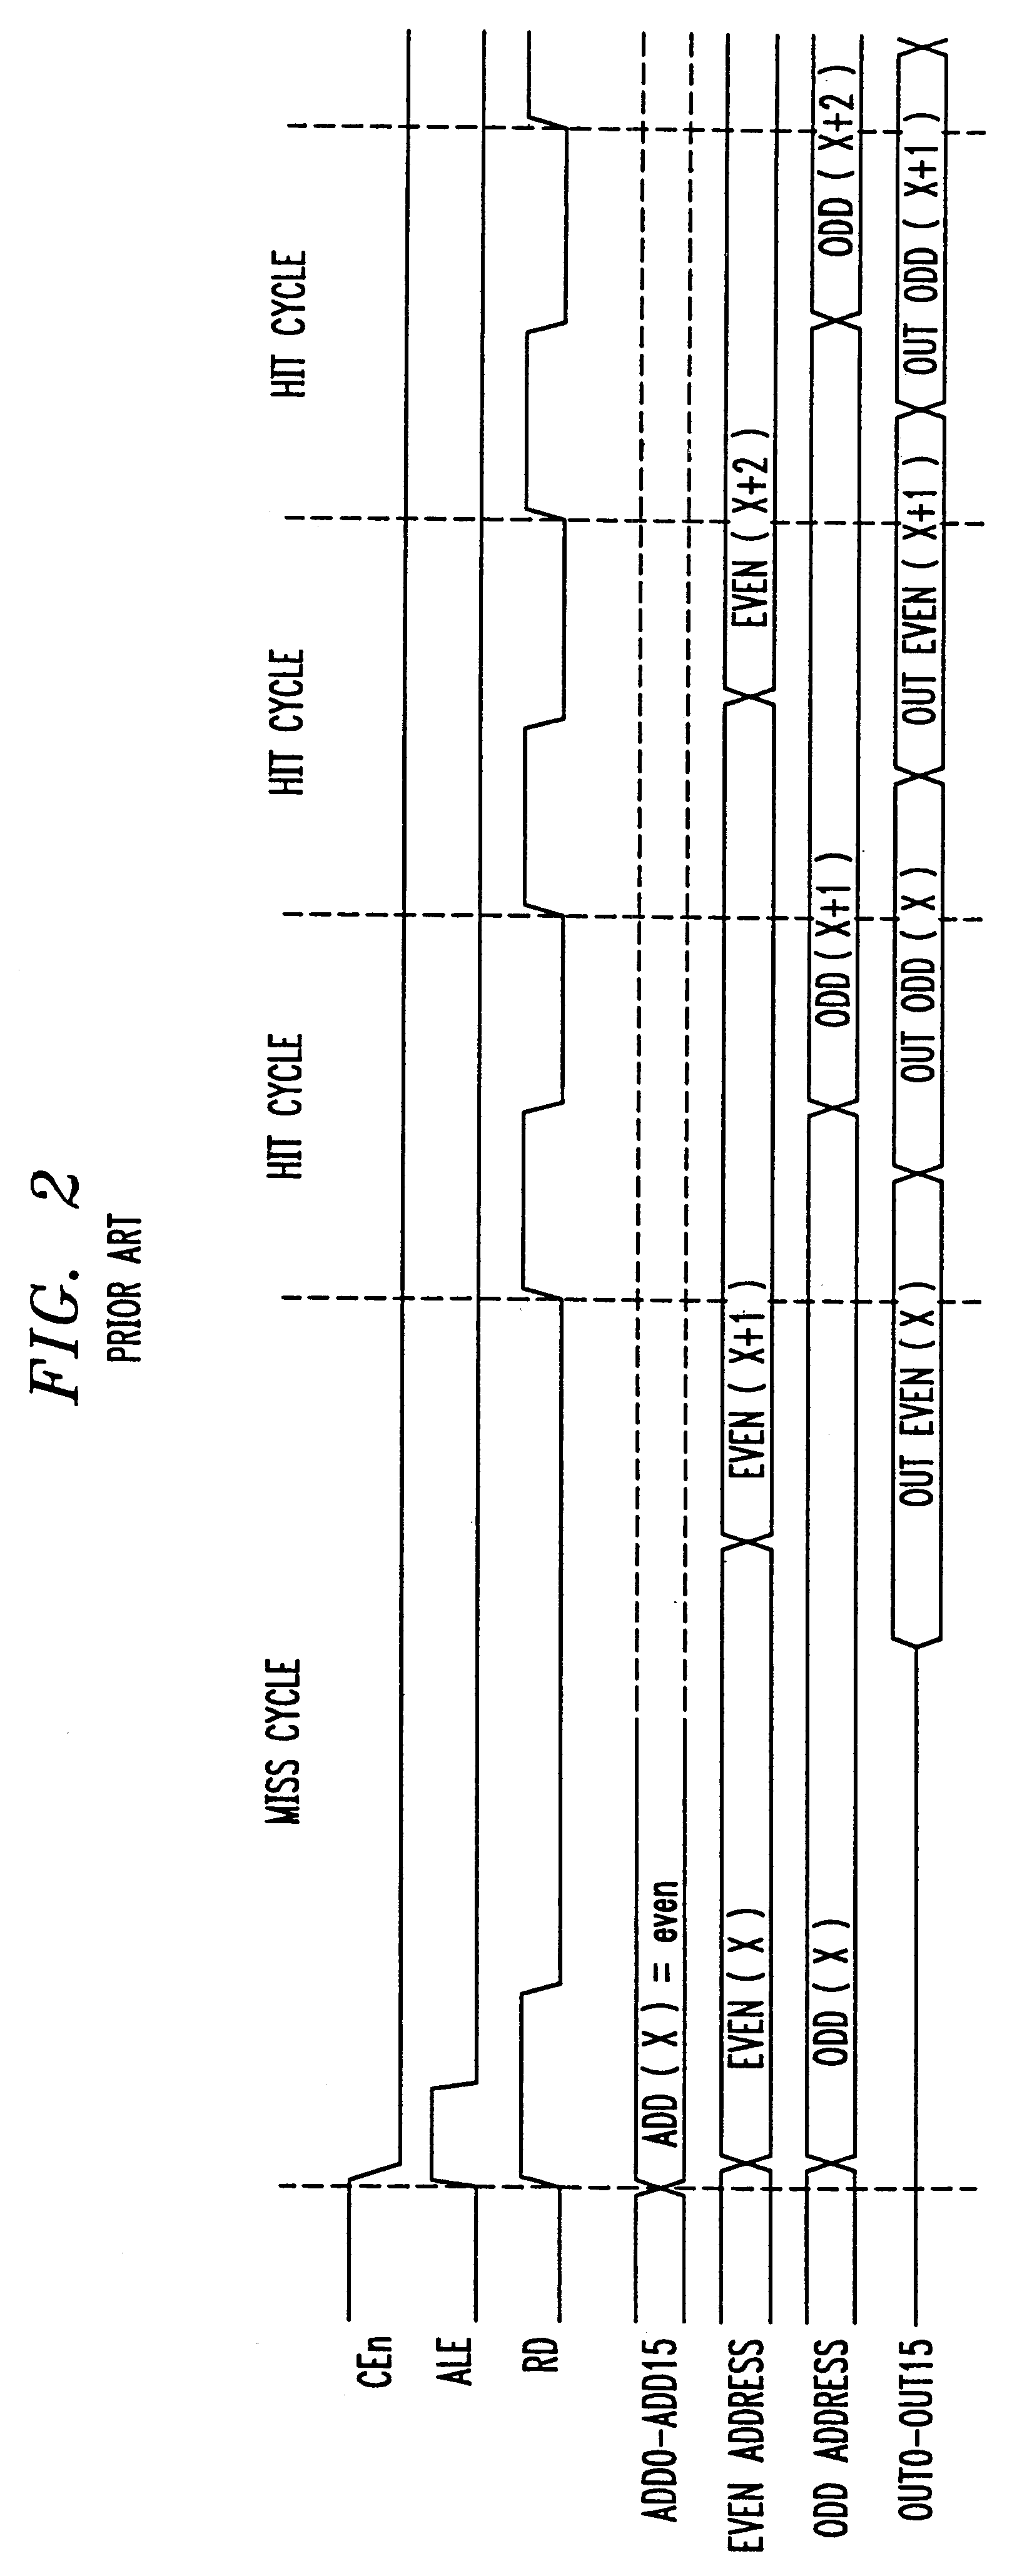 Interleaved memory device for sequential access synchronous reading with simplified address counters